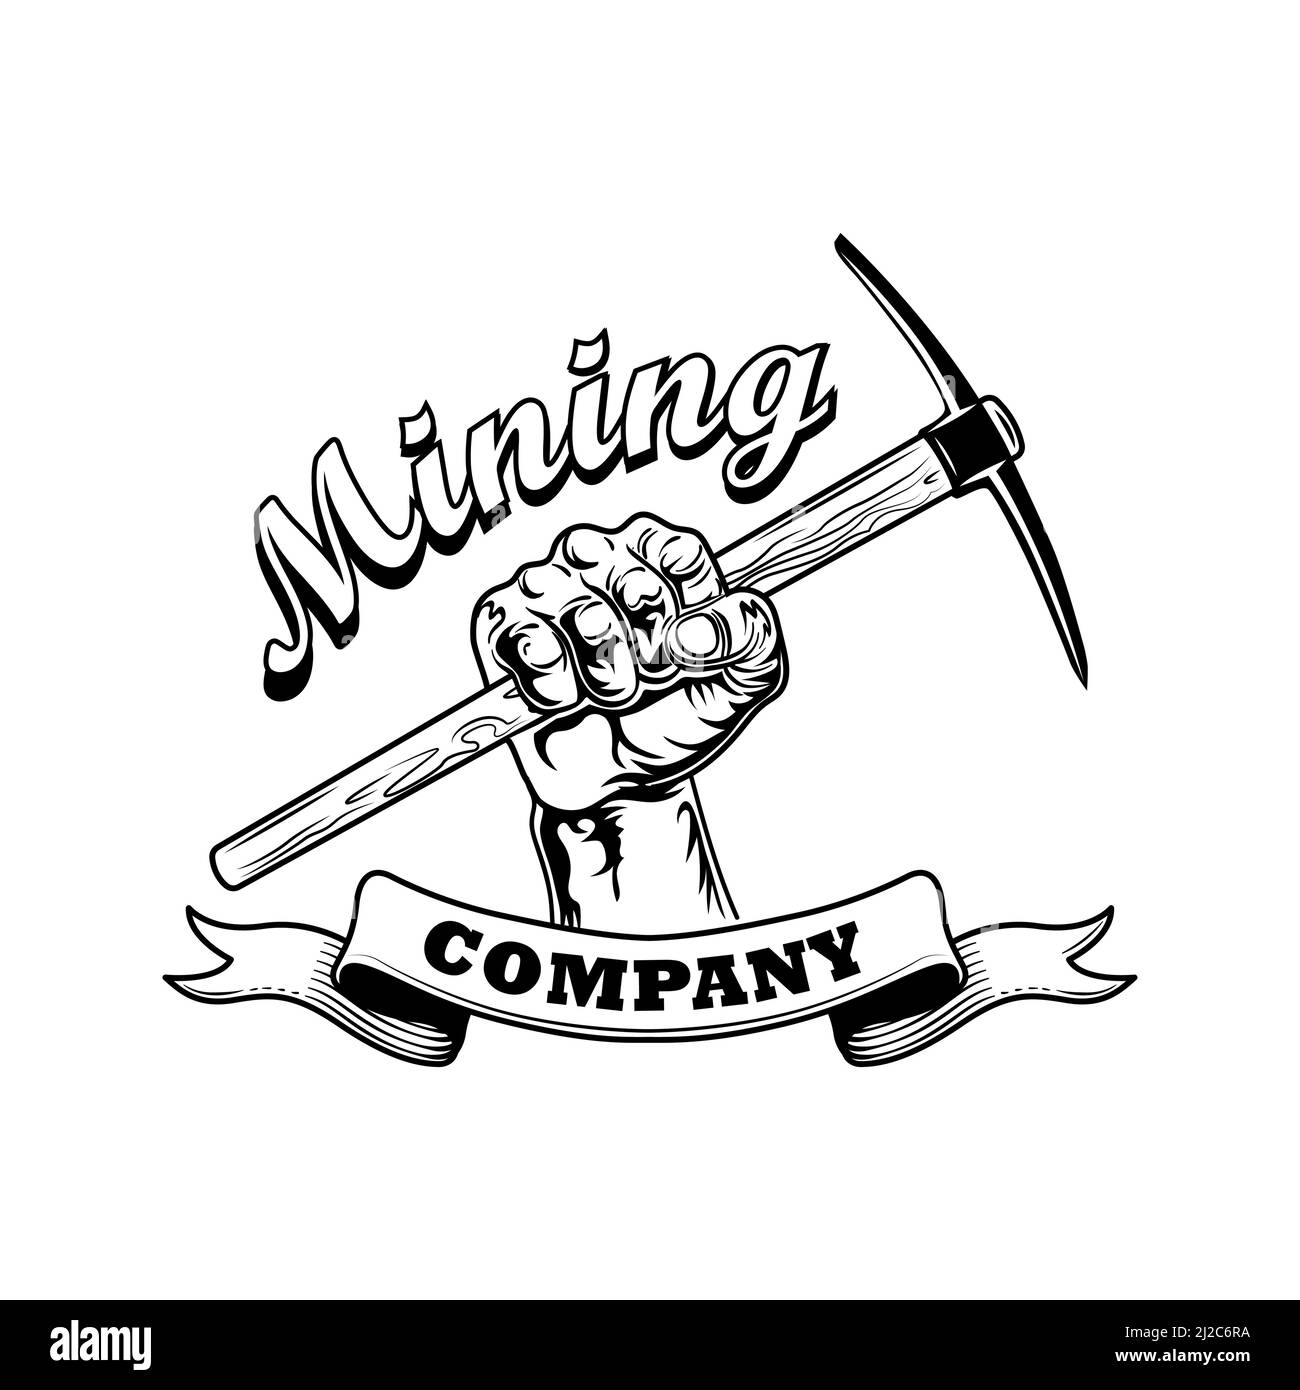 Coal miners hand vector illustration. Twibill in human fist, text on ribbon. Coal mining company concept for emblems and badges templates Stock Vector